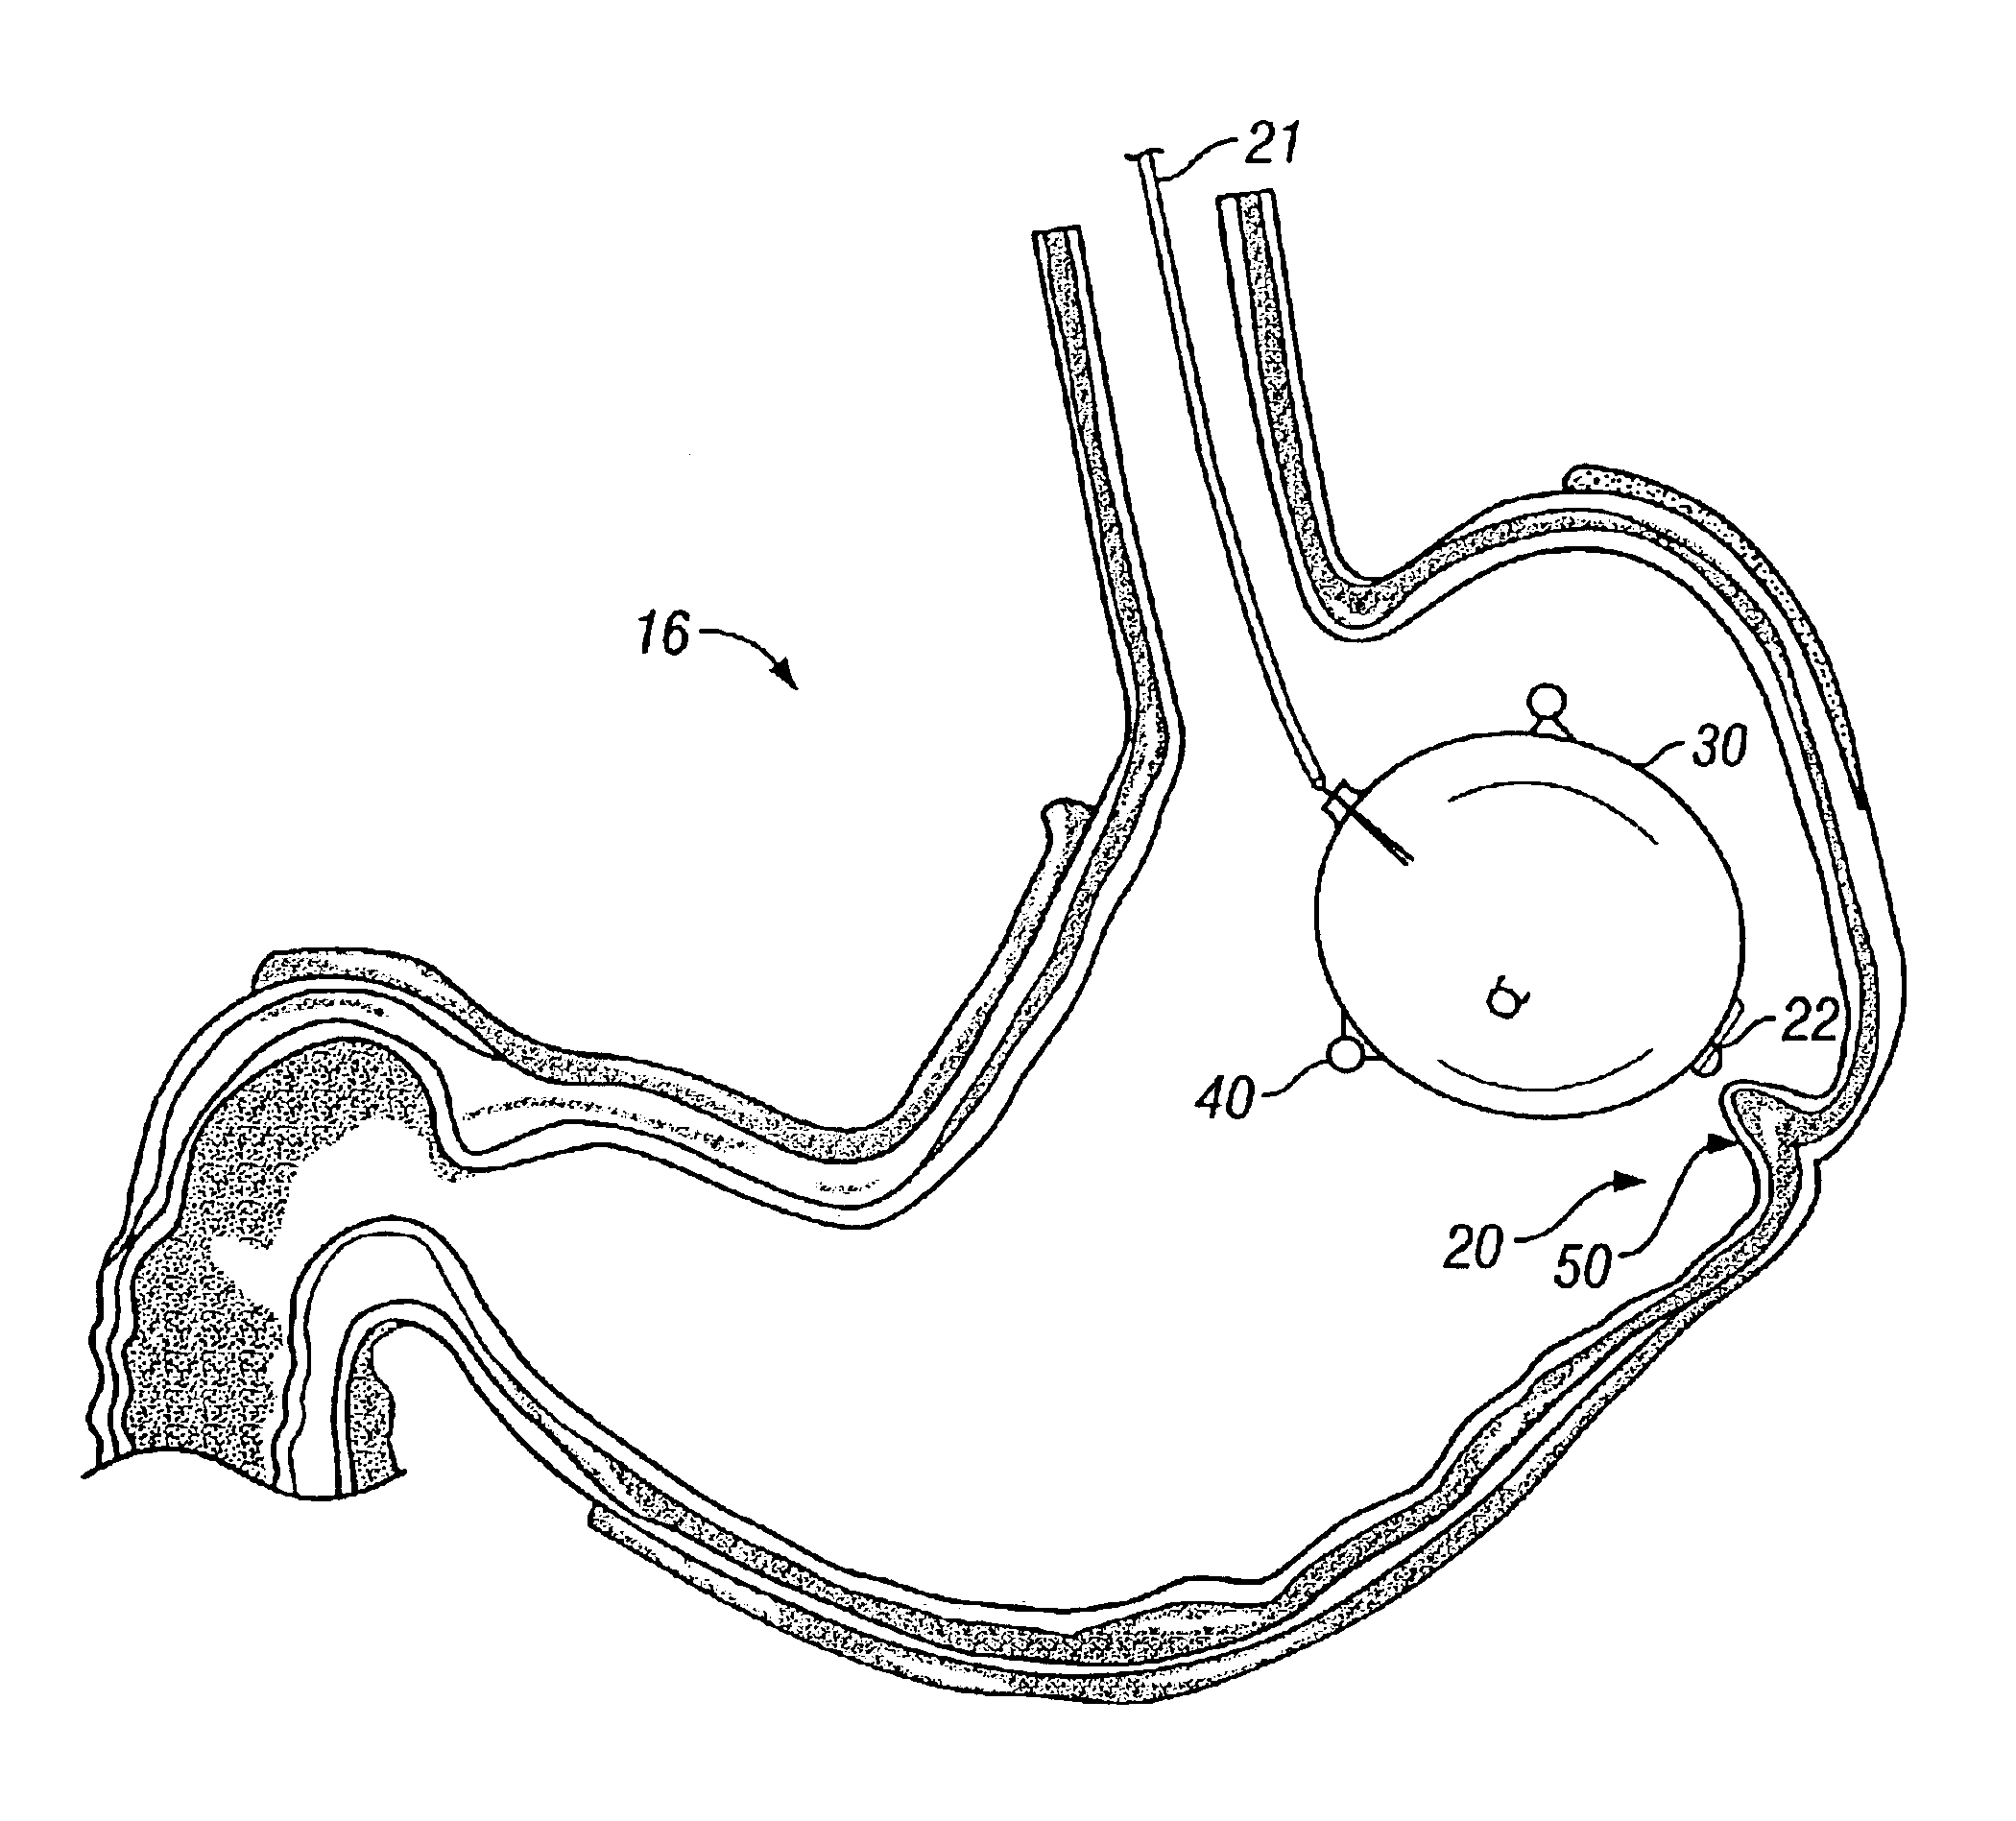 Intra-gastric fastening devices